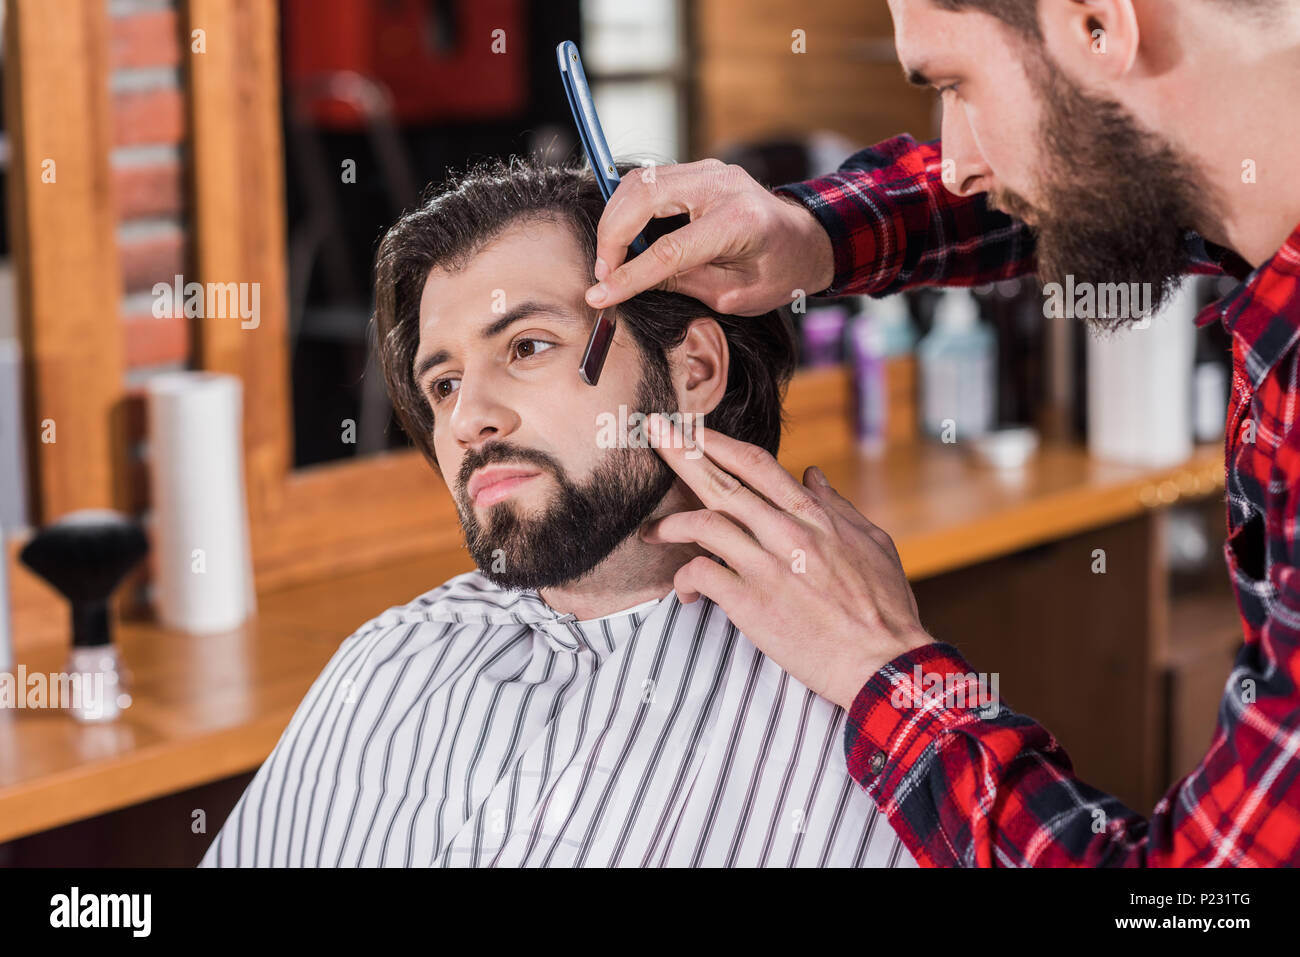 Discover 155+ hair cutting and shaving